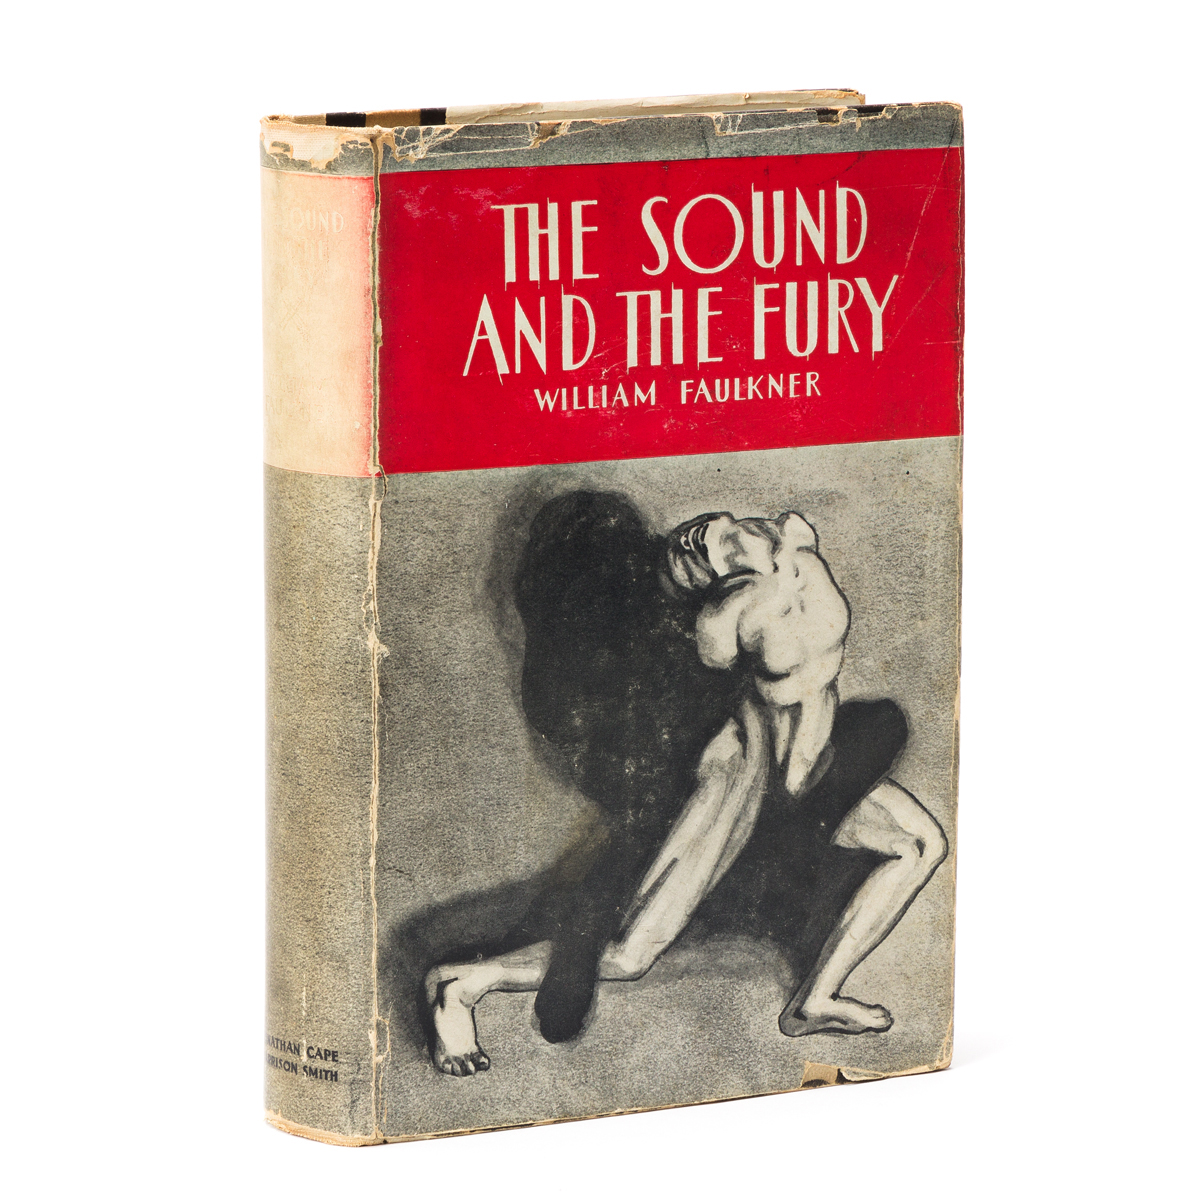 FAULKNER, WILLIAM. The Sound and the Fury.